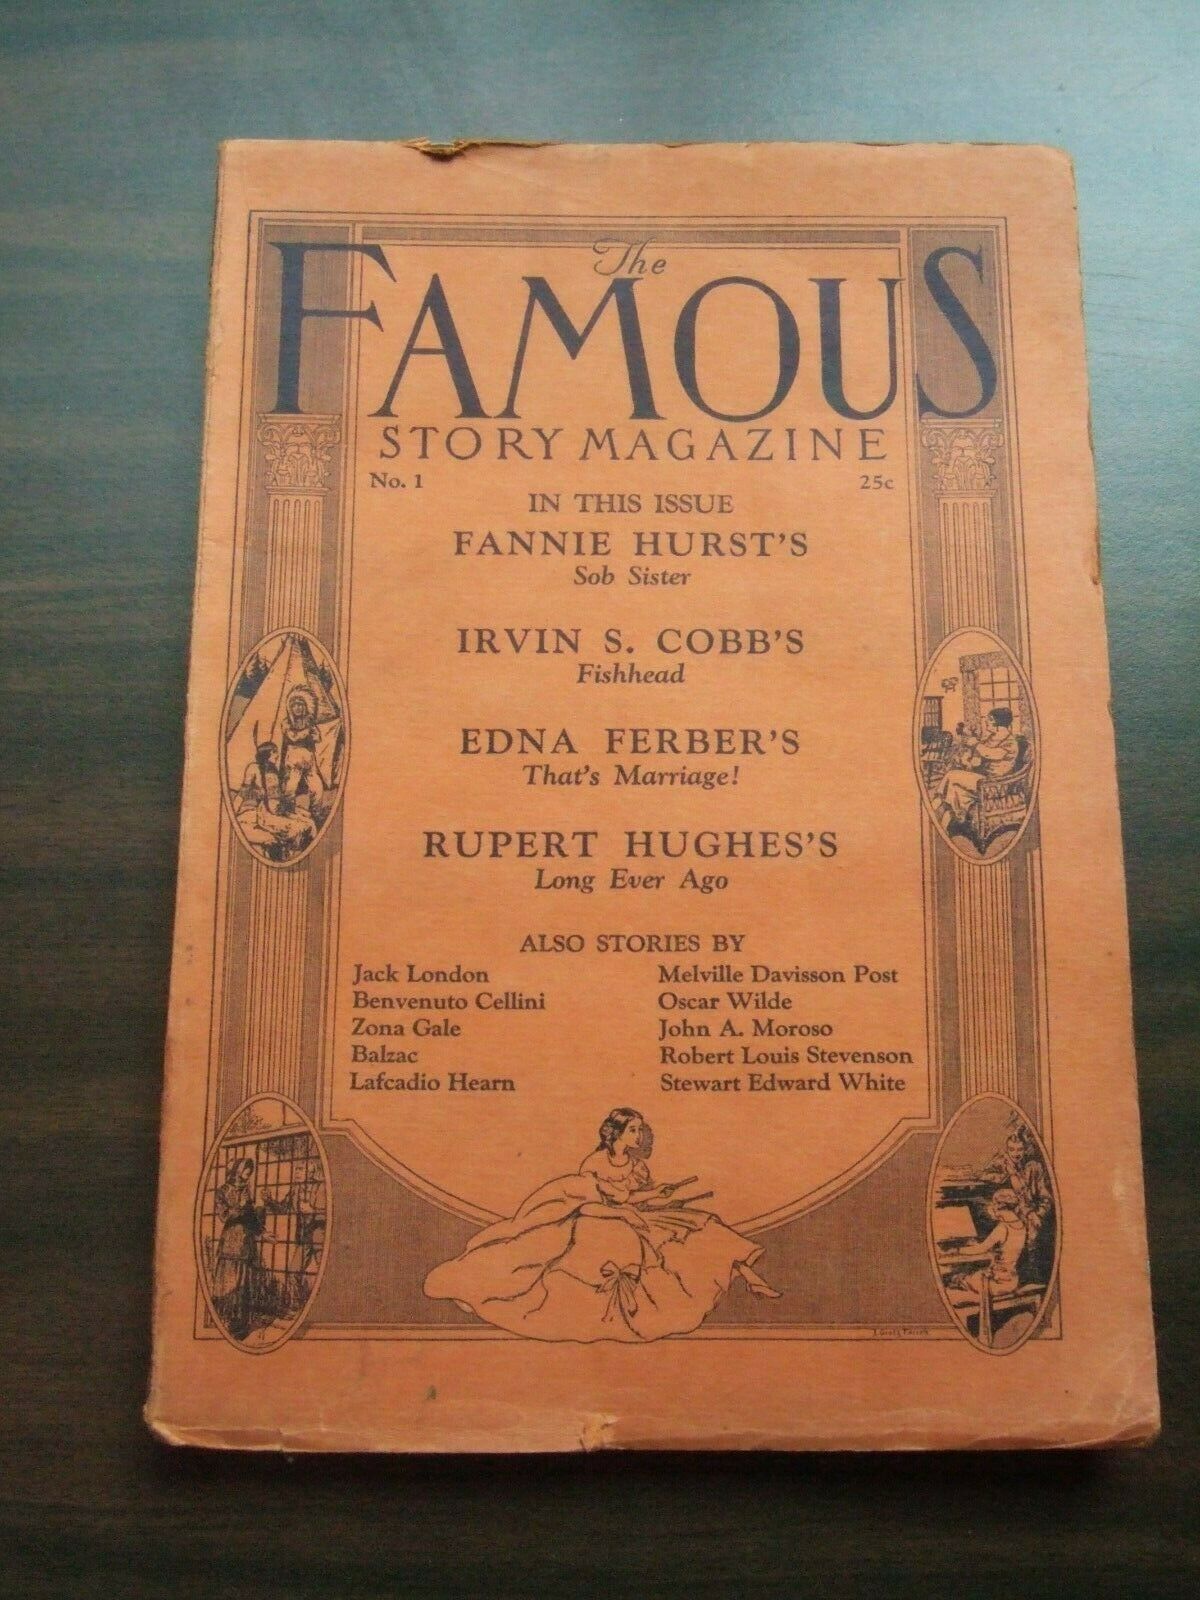 The Famous Story Magazine - October 1925